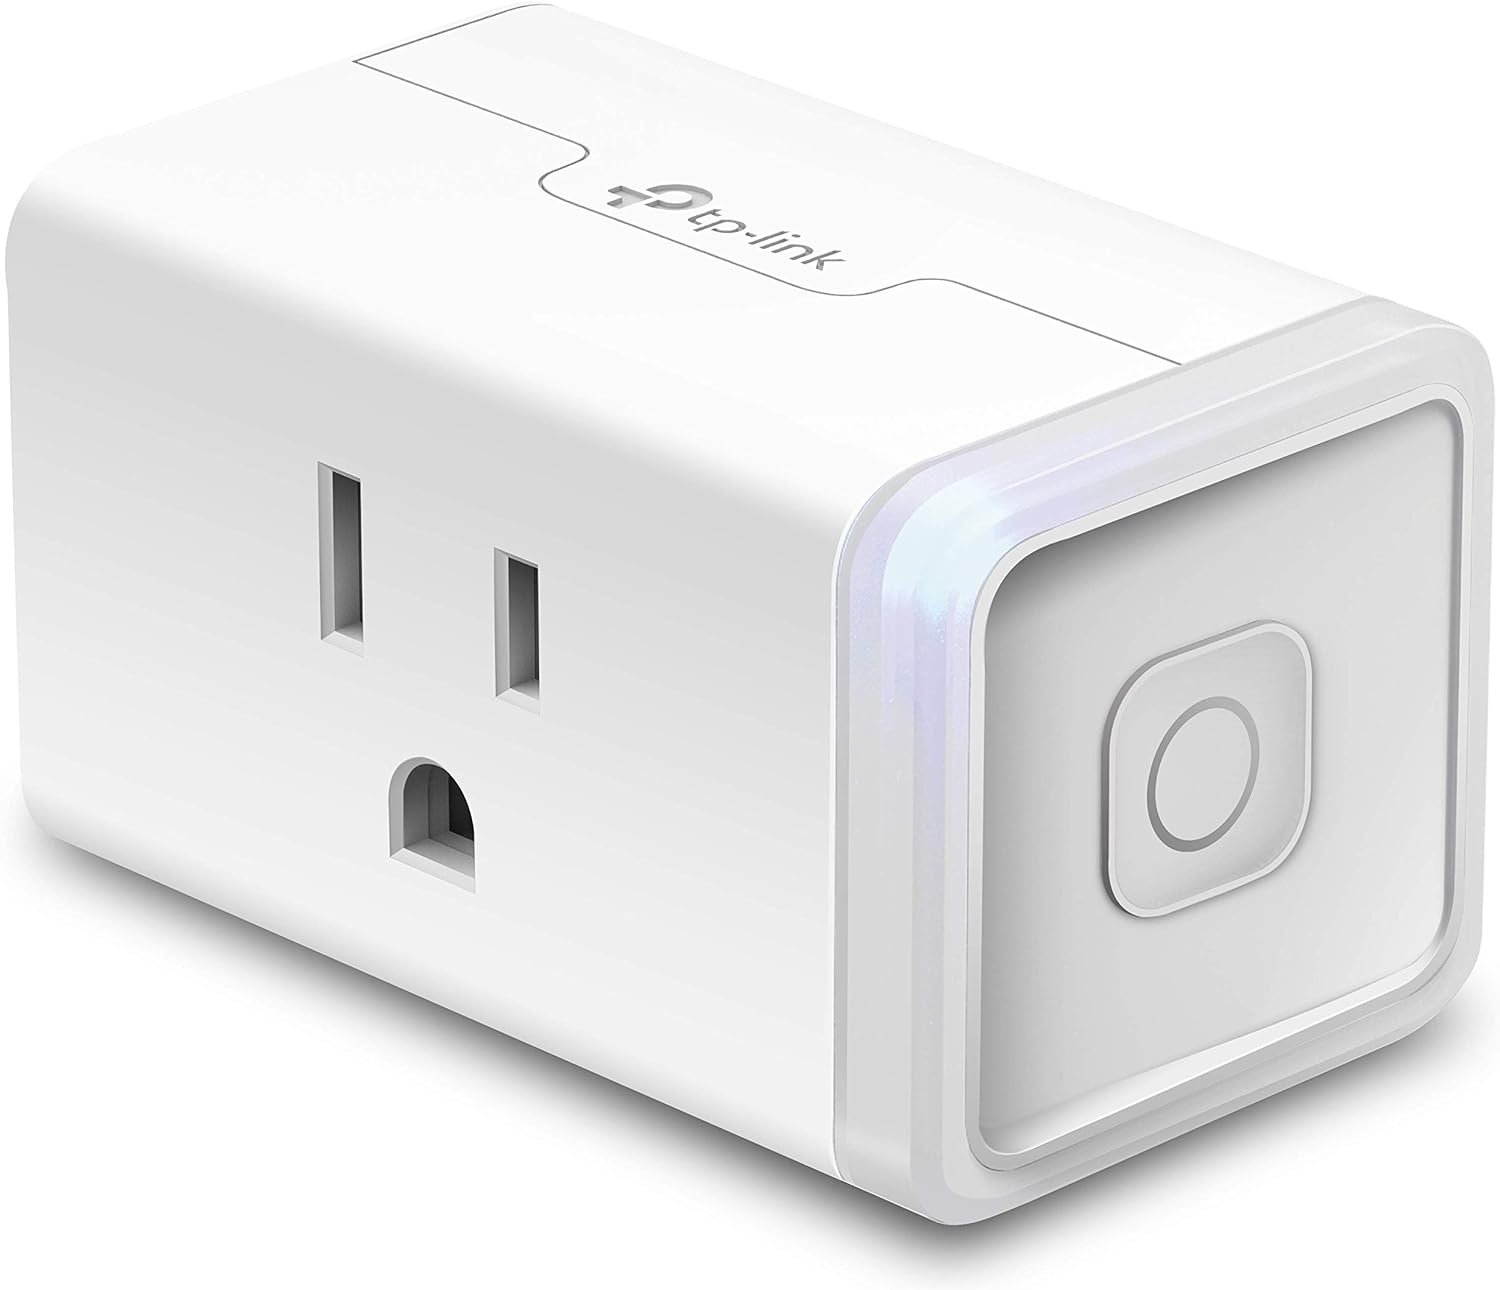 Kasa Smart WiFi Plug Mini by TP-Link - Reliable WiFi Connection, No Hub Required, Works with Alexa Echo & Google Assistant (HS105)